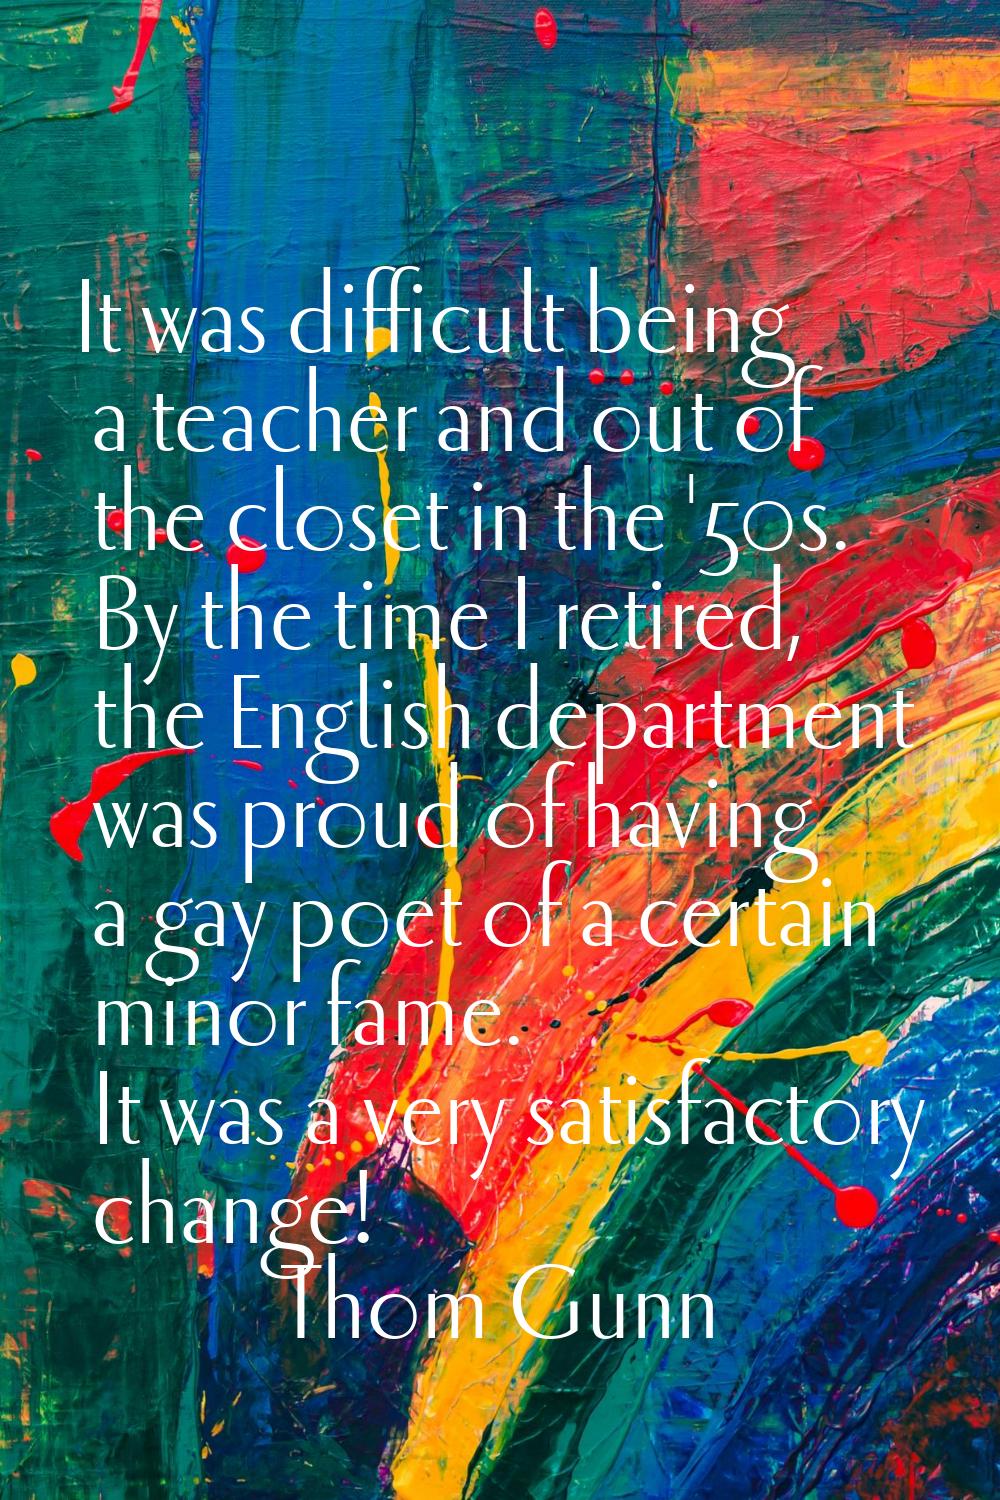 It was difficult being a teacher and out of the closet in the '50s. By the time I retired, the Engl